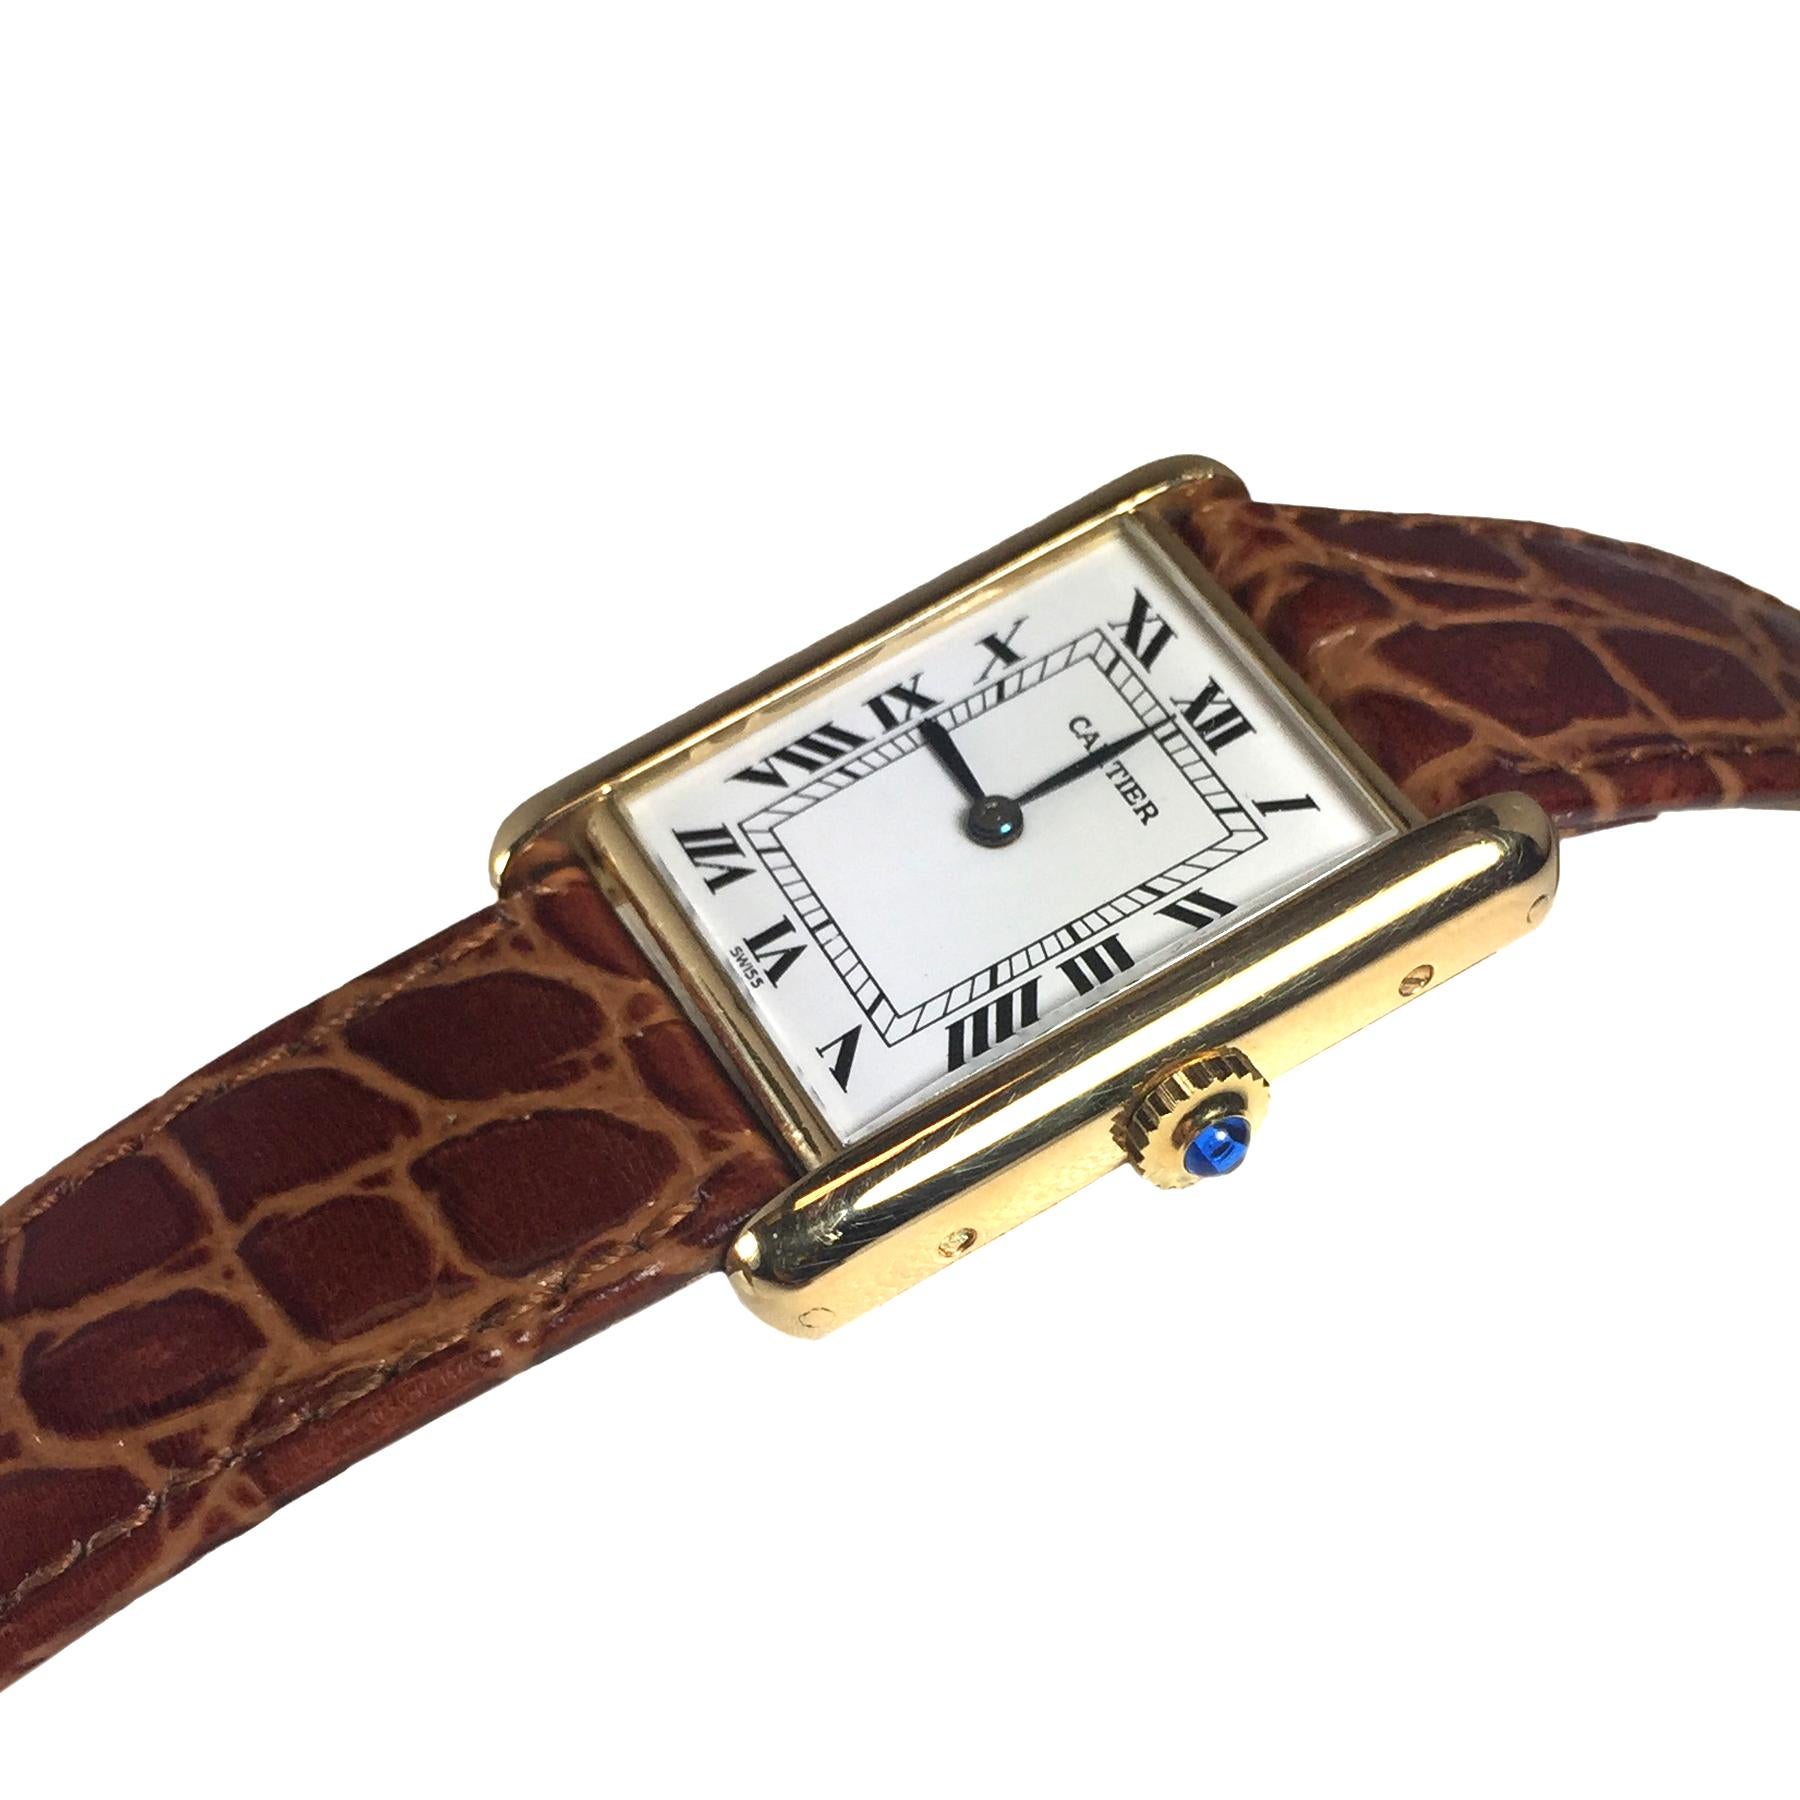 Circa 1980s Cartier Paris Tank Wrist watch, 30 X 23 MM 18K Yellow Gold Case, Mechanical, Manual wind 17 Jewel Cartier Movement, White Dial with Black Roman Numerals, Sapphire Crown. Hirsch Brown Croco Strap with Cartier Gold Plate Tang Buckle. Watch